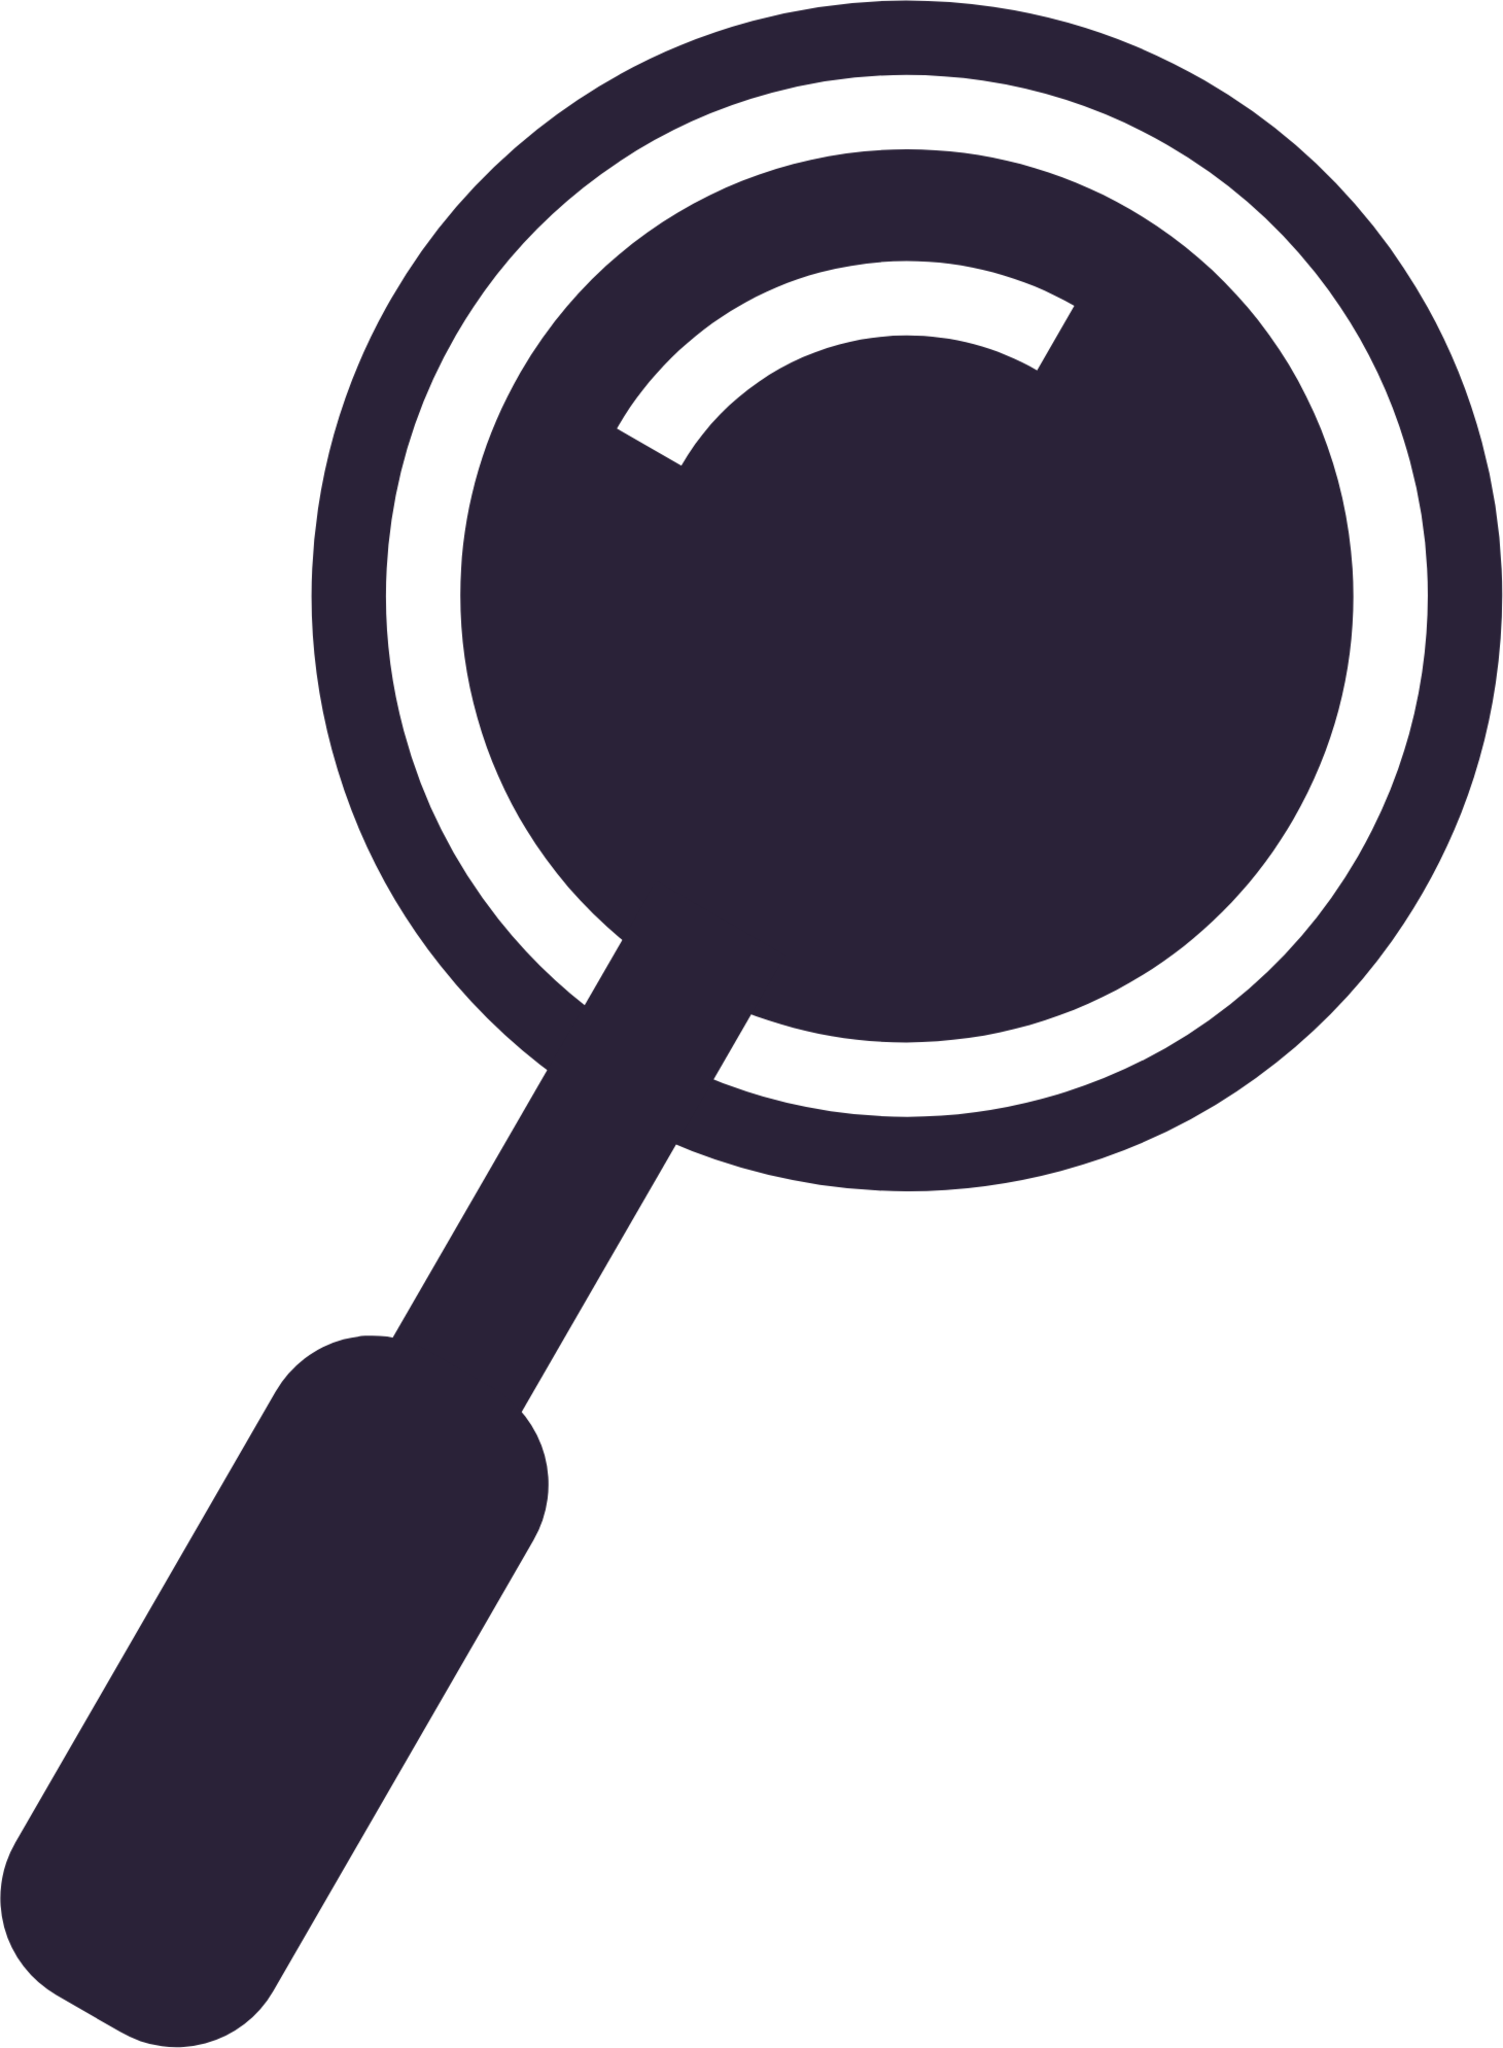 magnifying glass 1 icon